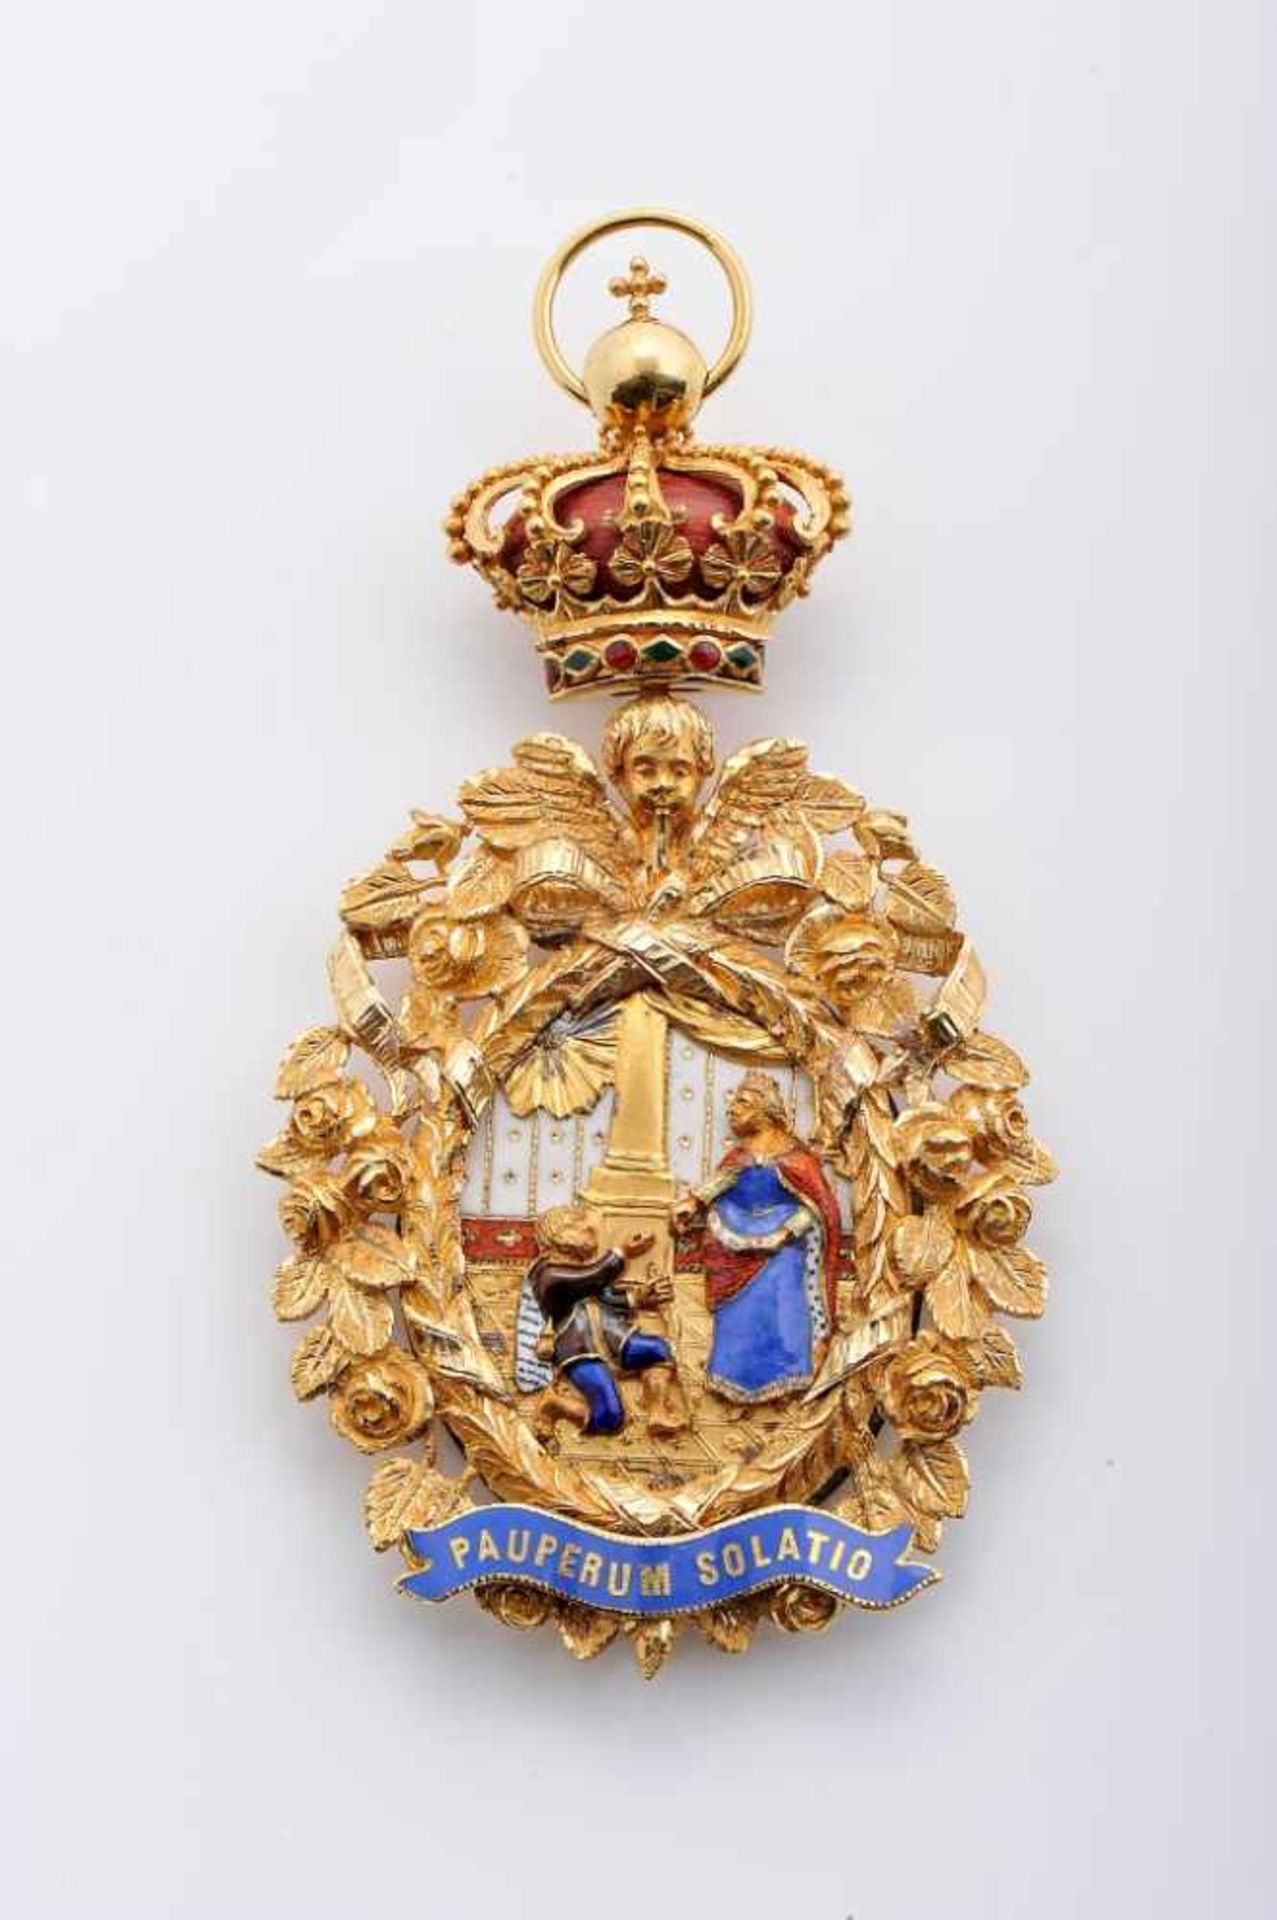 Insignia of the Portuguese Royal Order of Queen Saint IsabelInsignia of the Portuguese Royal Order